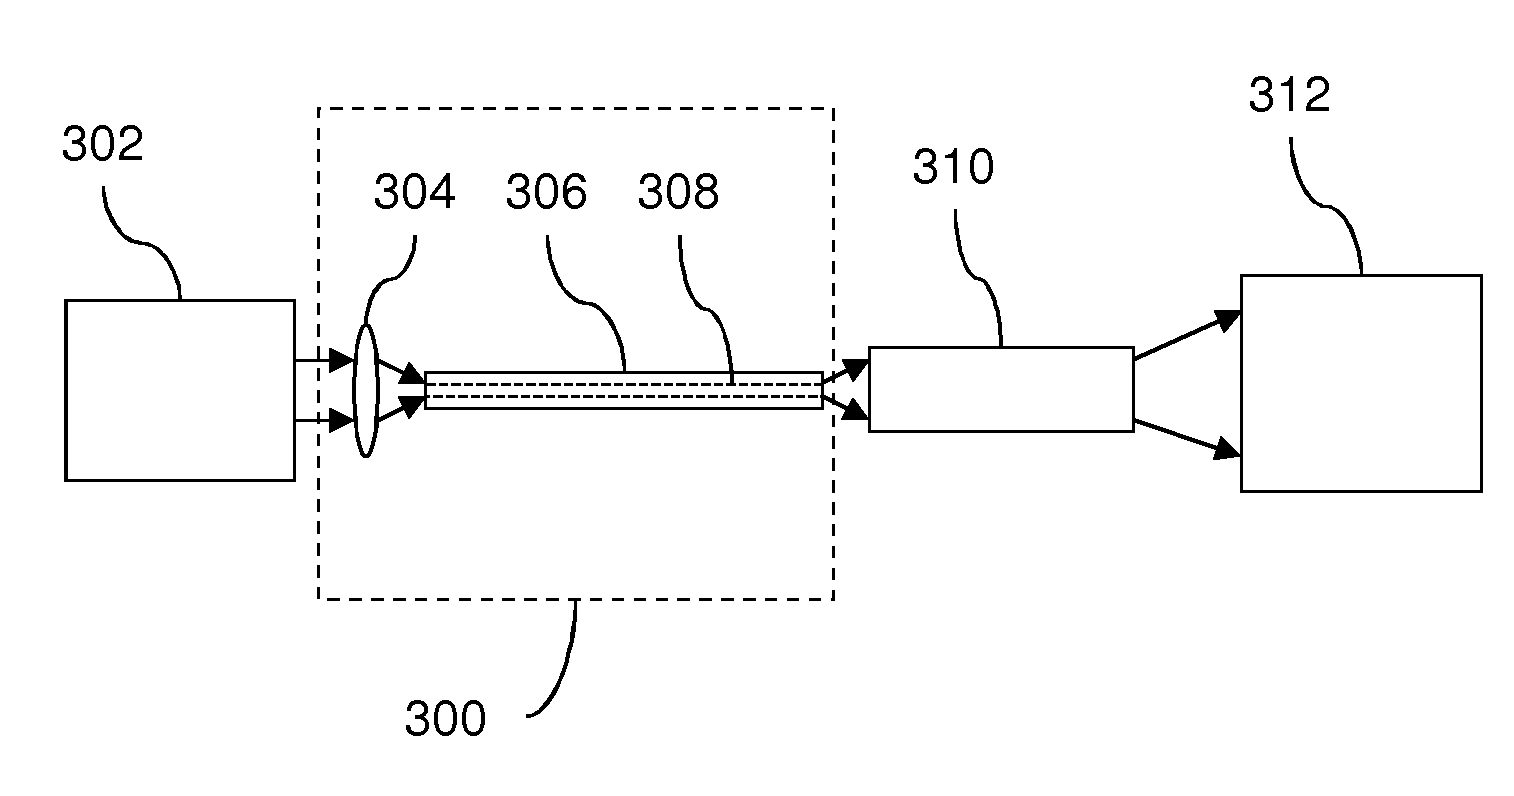 Frequency Control of Despeckling